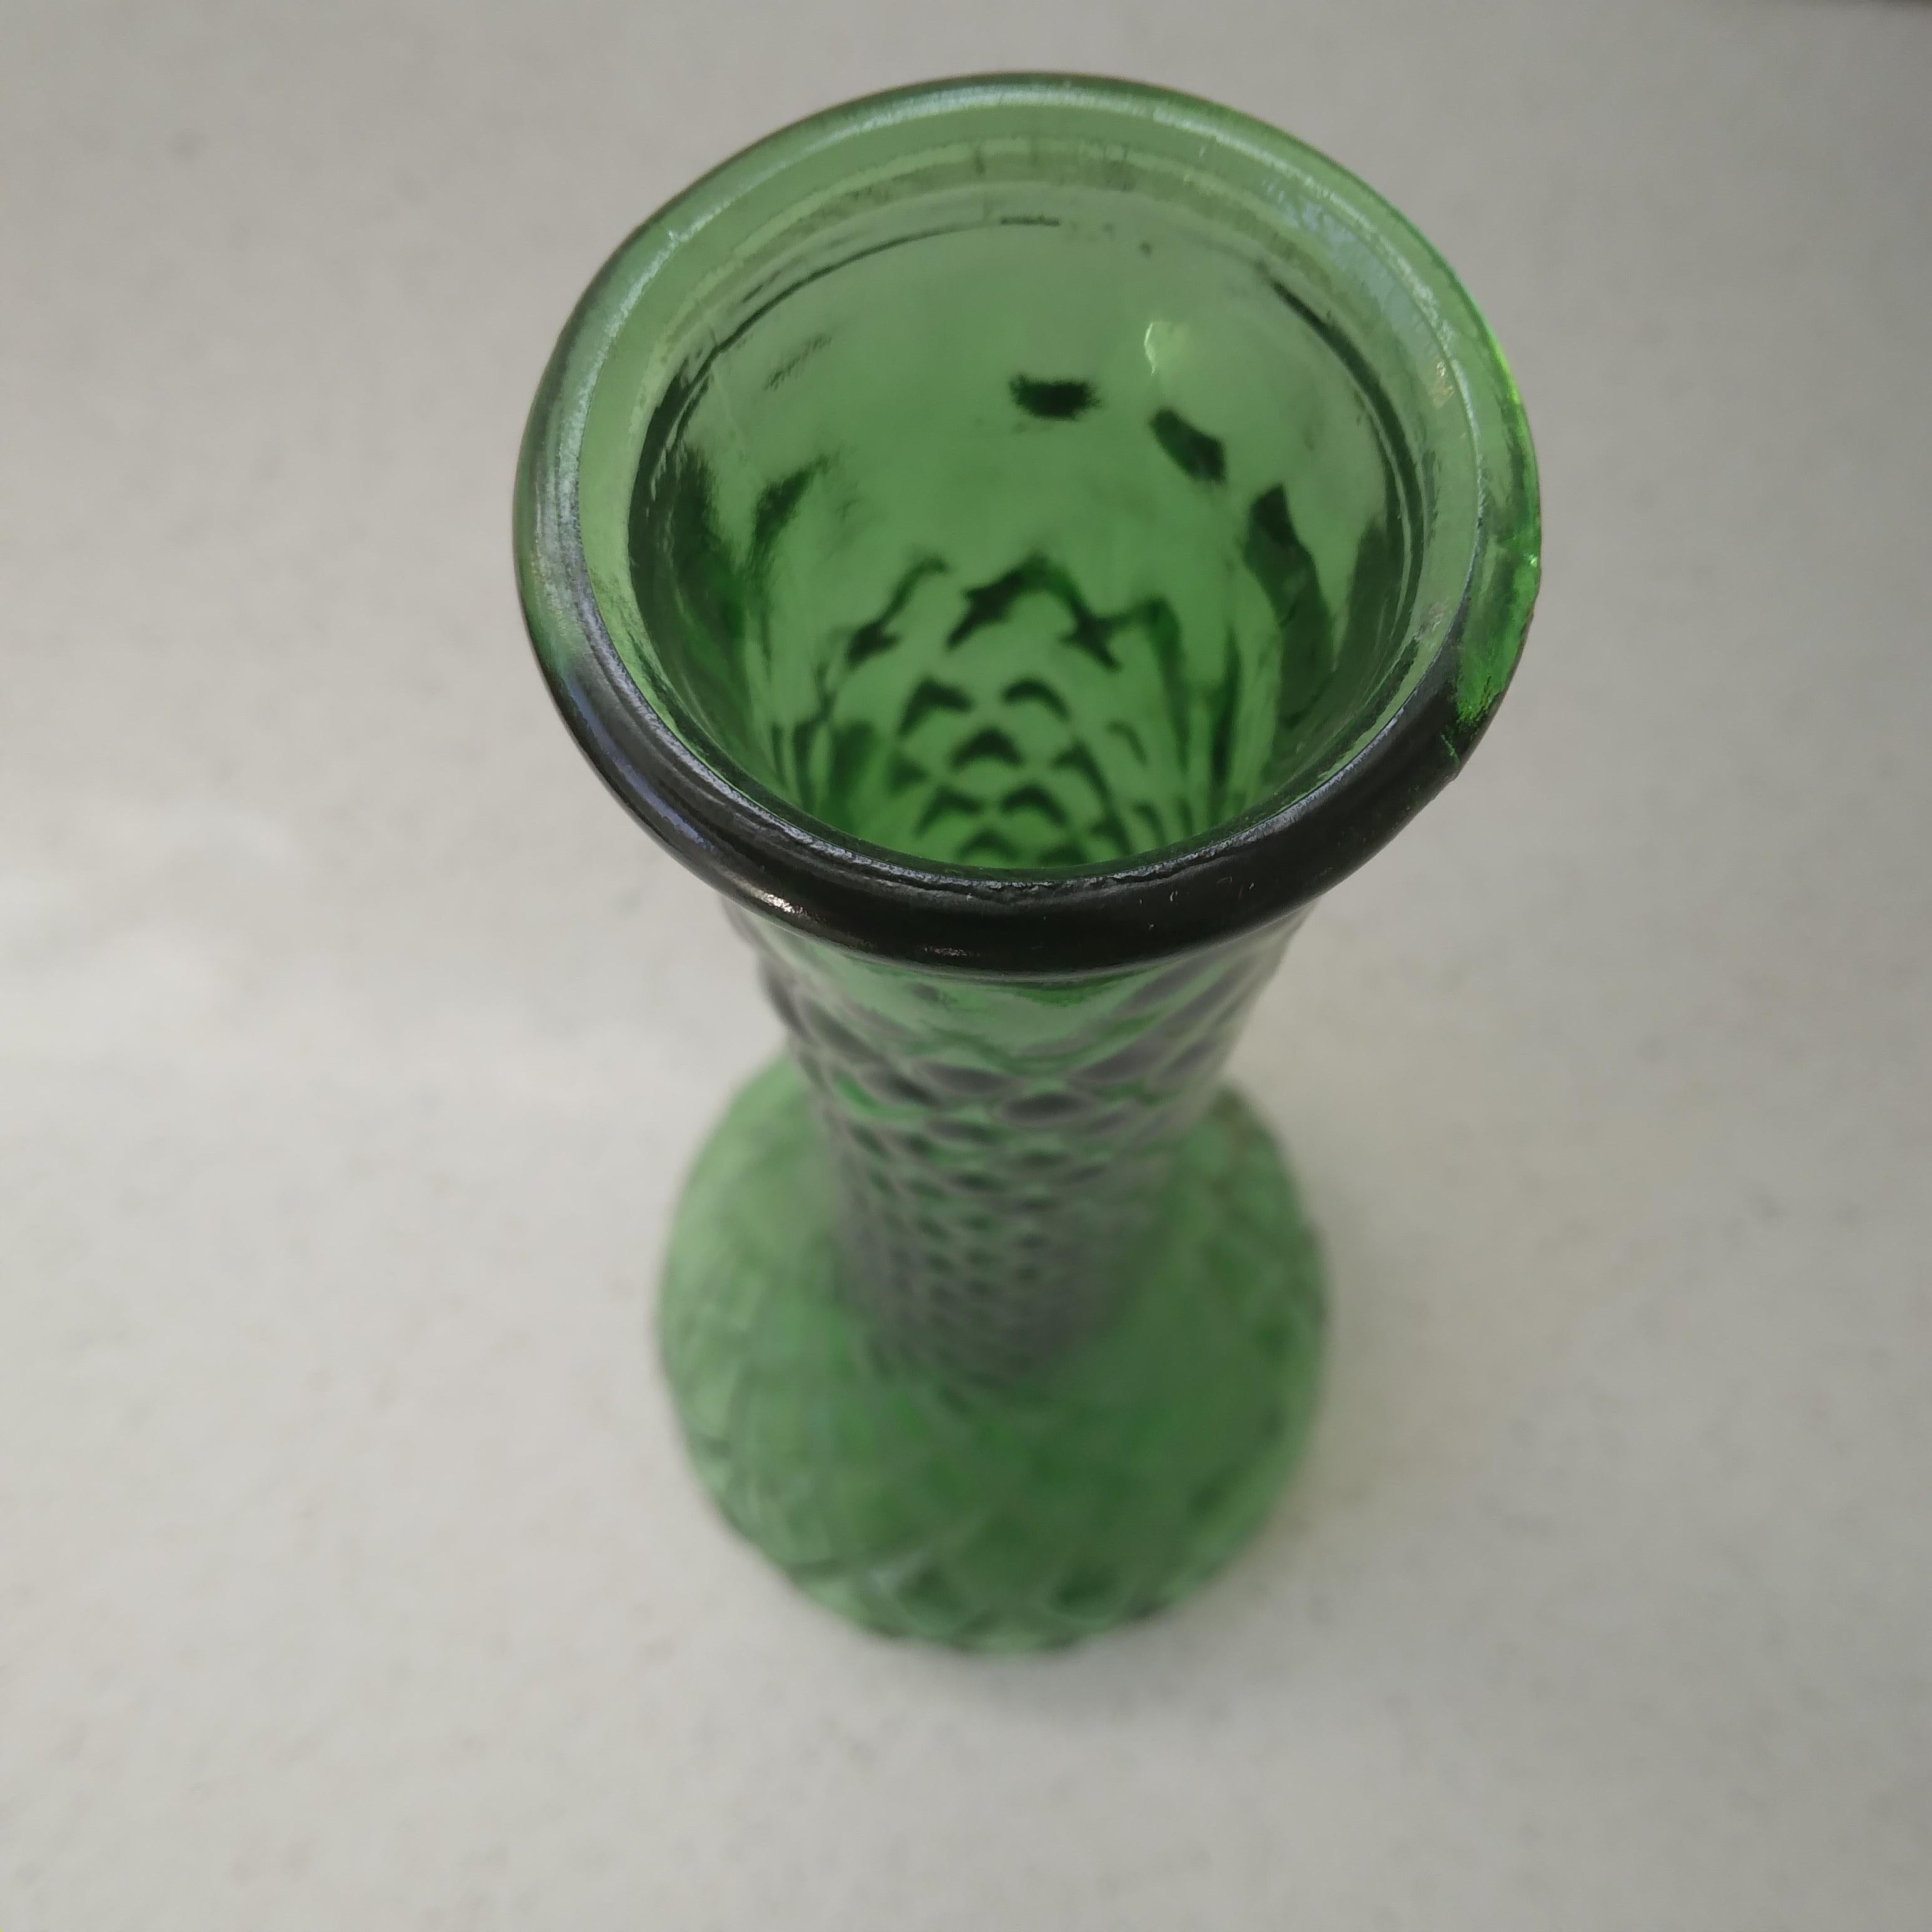 Vintage Diamond Patterned Green Glass Bud Vase In Good Condition For Sale In Munster, IN